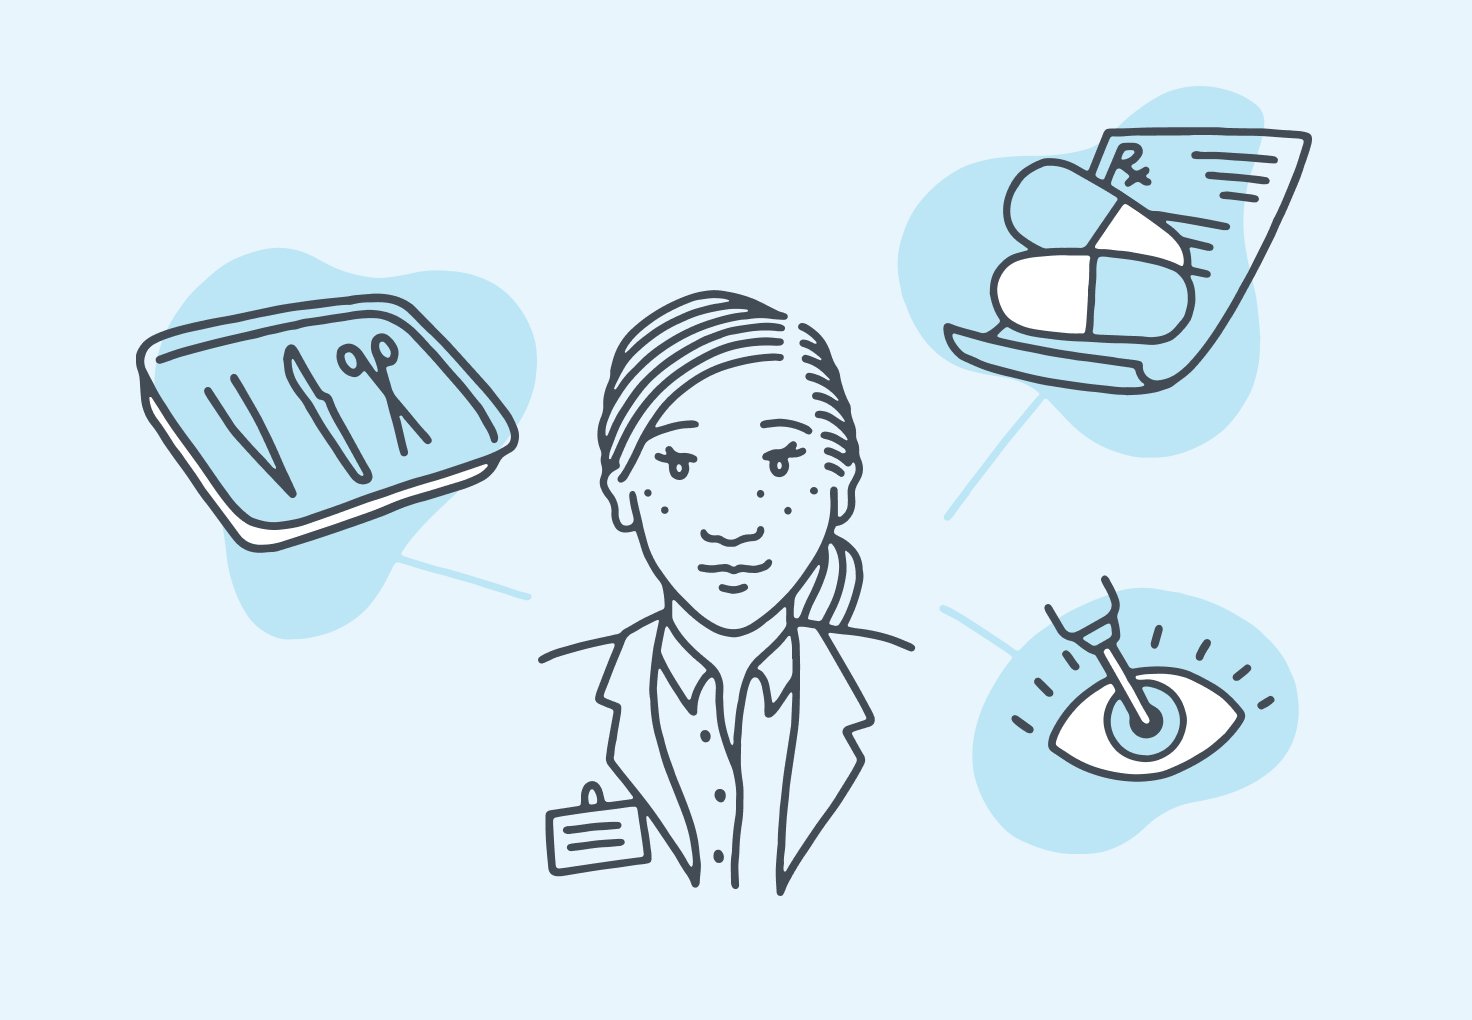 Illustration of an ophthalmologist with icons for her different duties